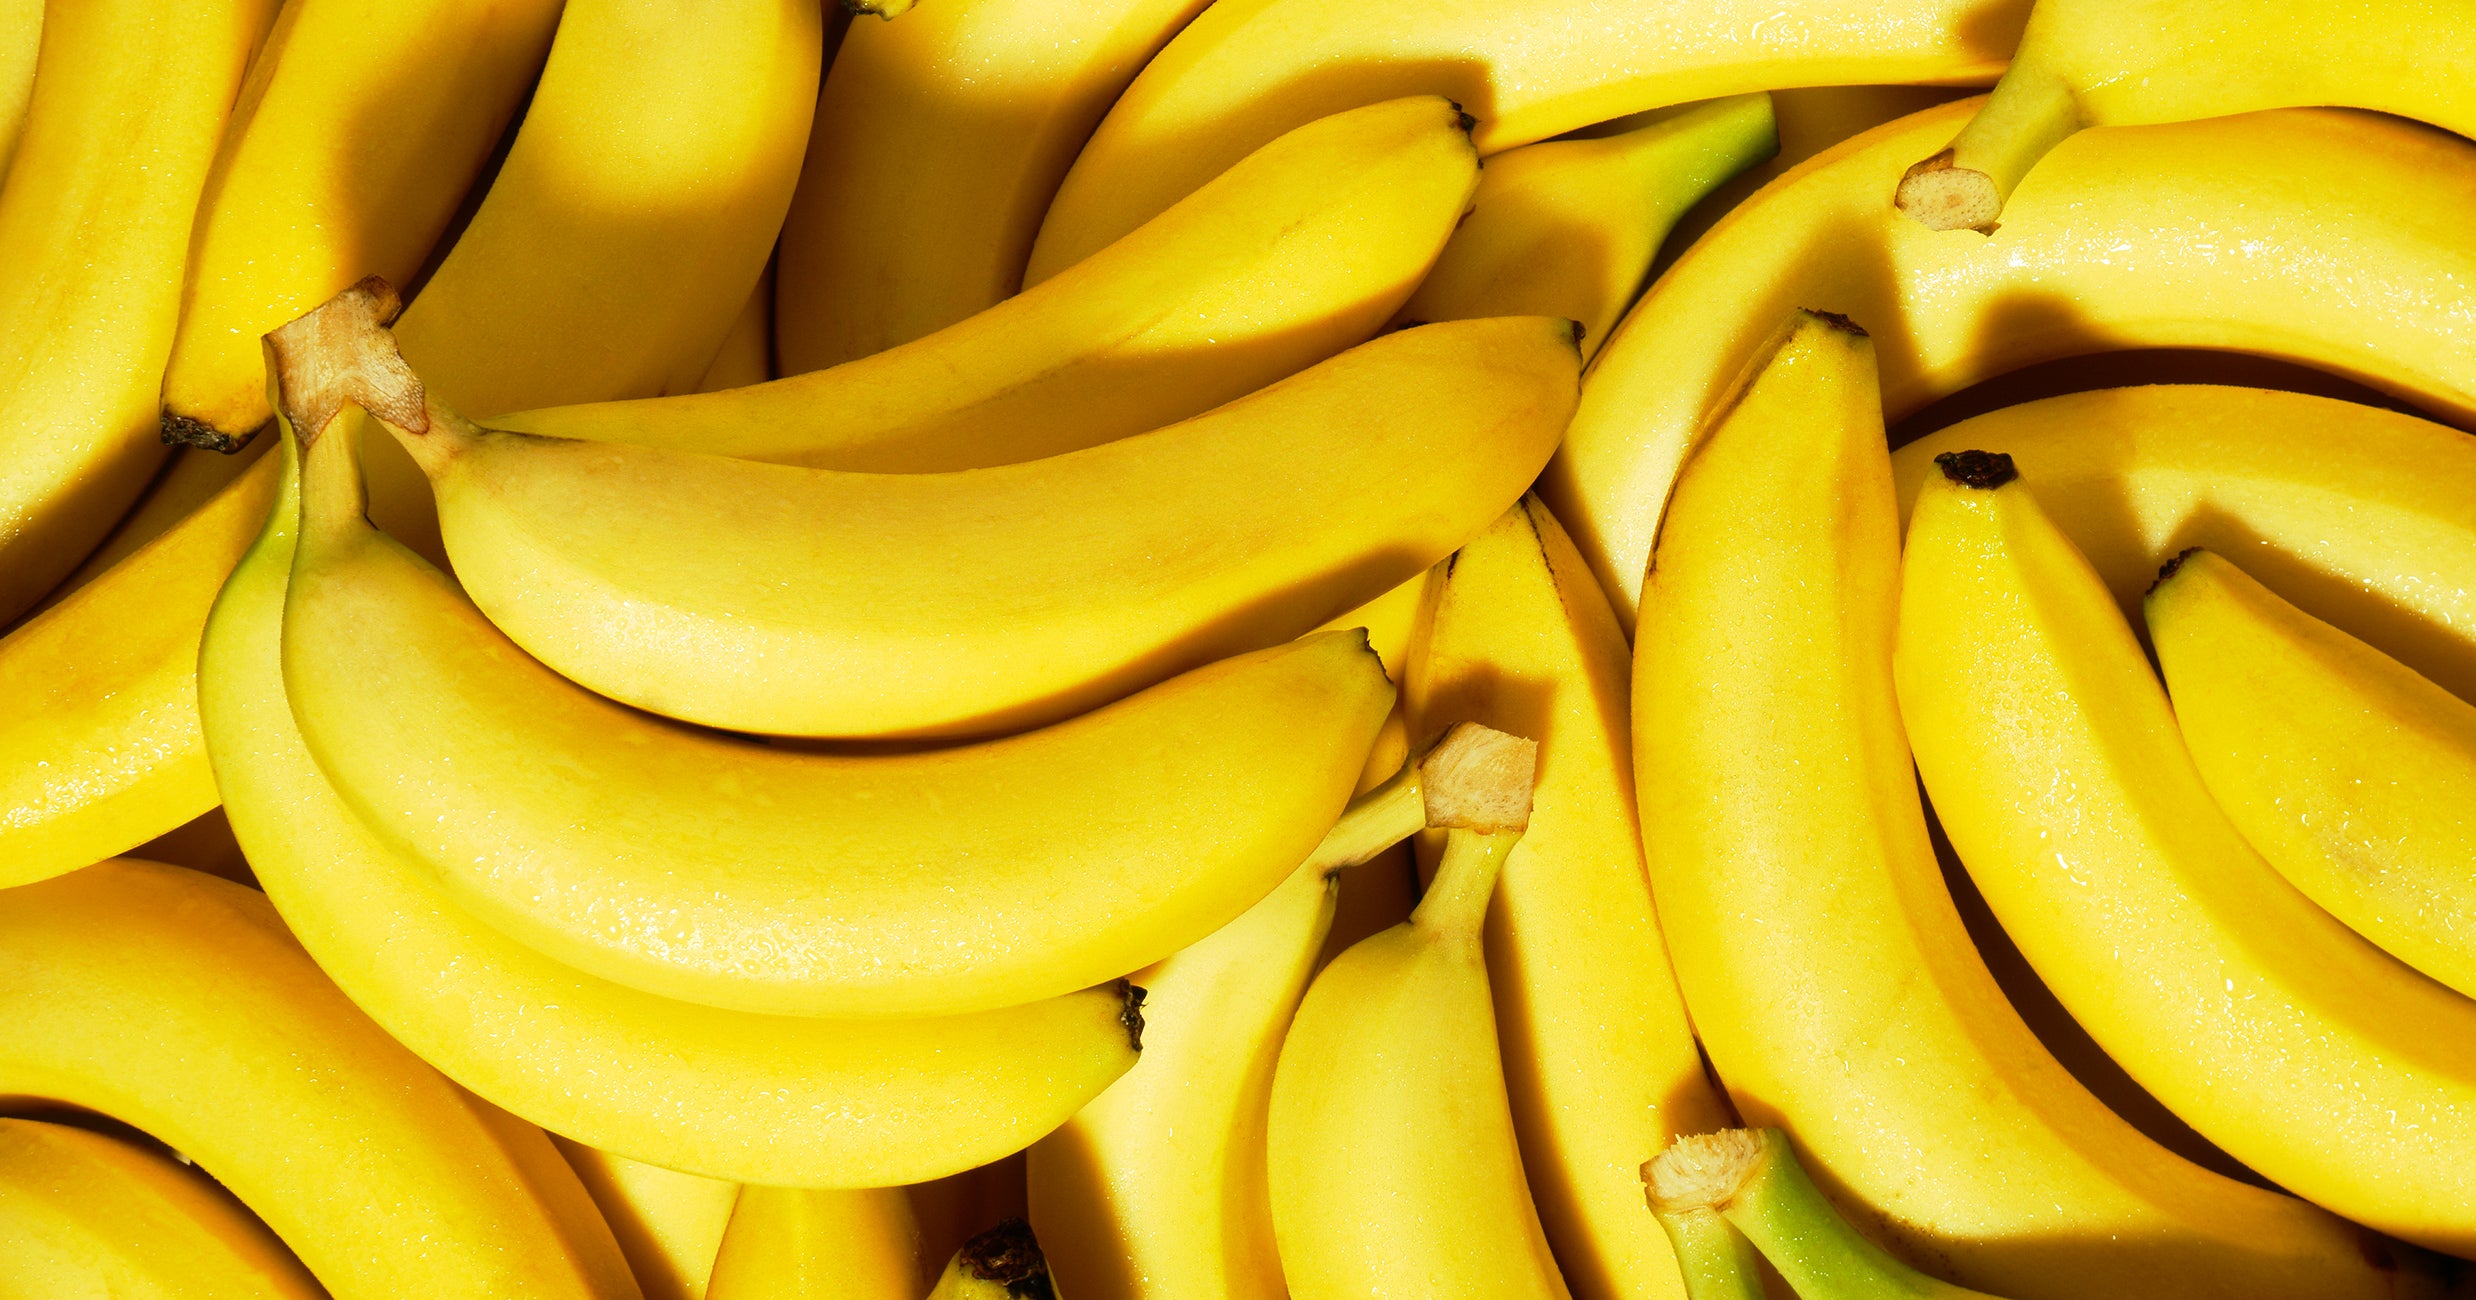 What Is The Right Way To Peel & Eat A Banana?